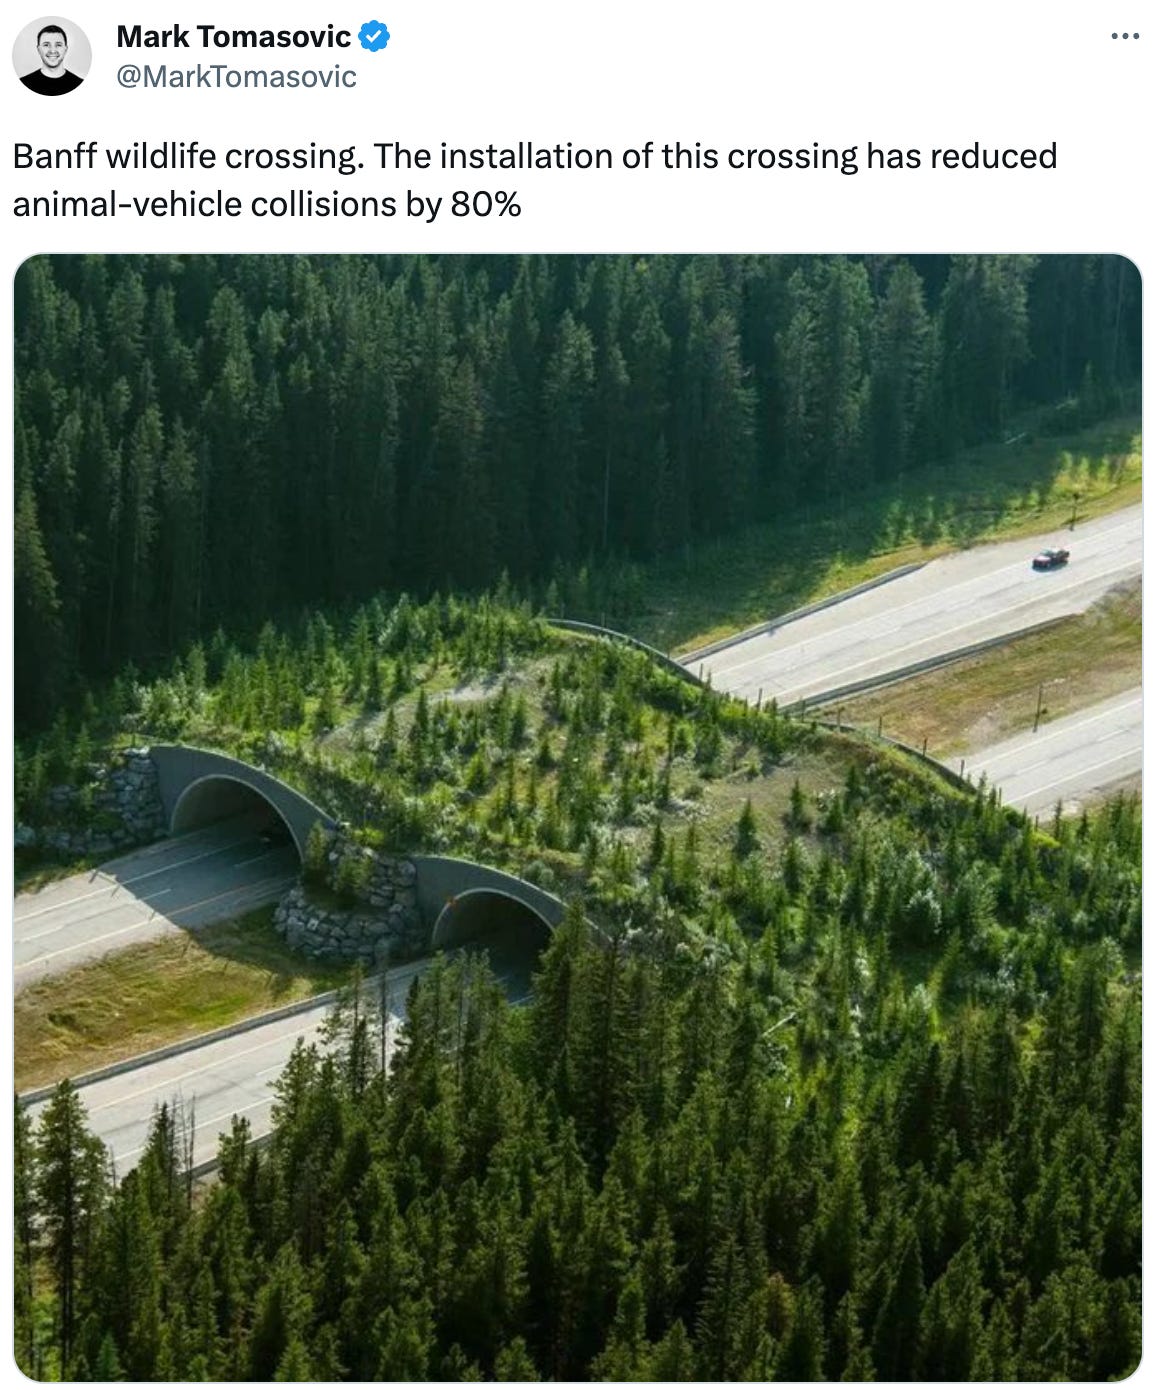  See new Tweets Conversation Mark Tomasovic @MarkTomasovic Banff wildlife crossing. The installation of this crossing has reduced animal-vehicle collisions by 80%